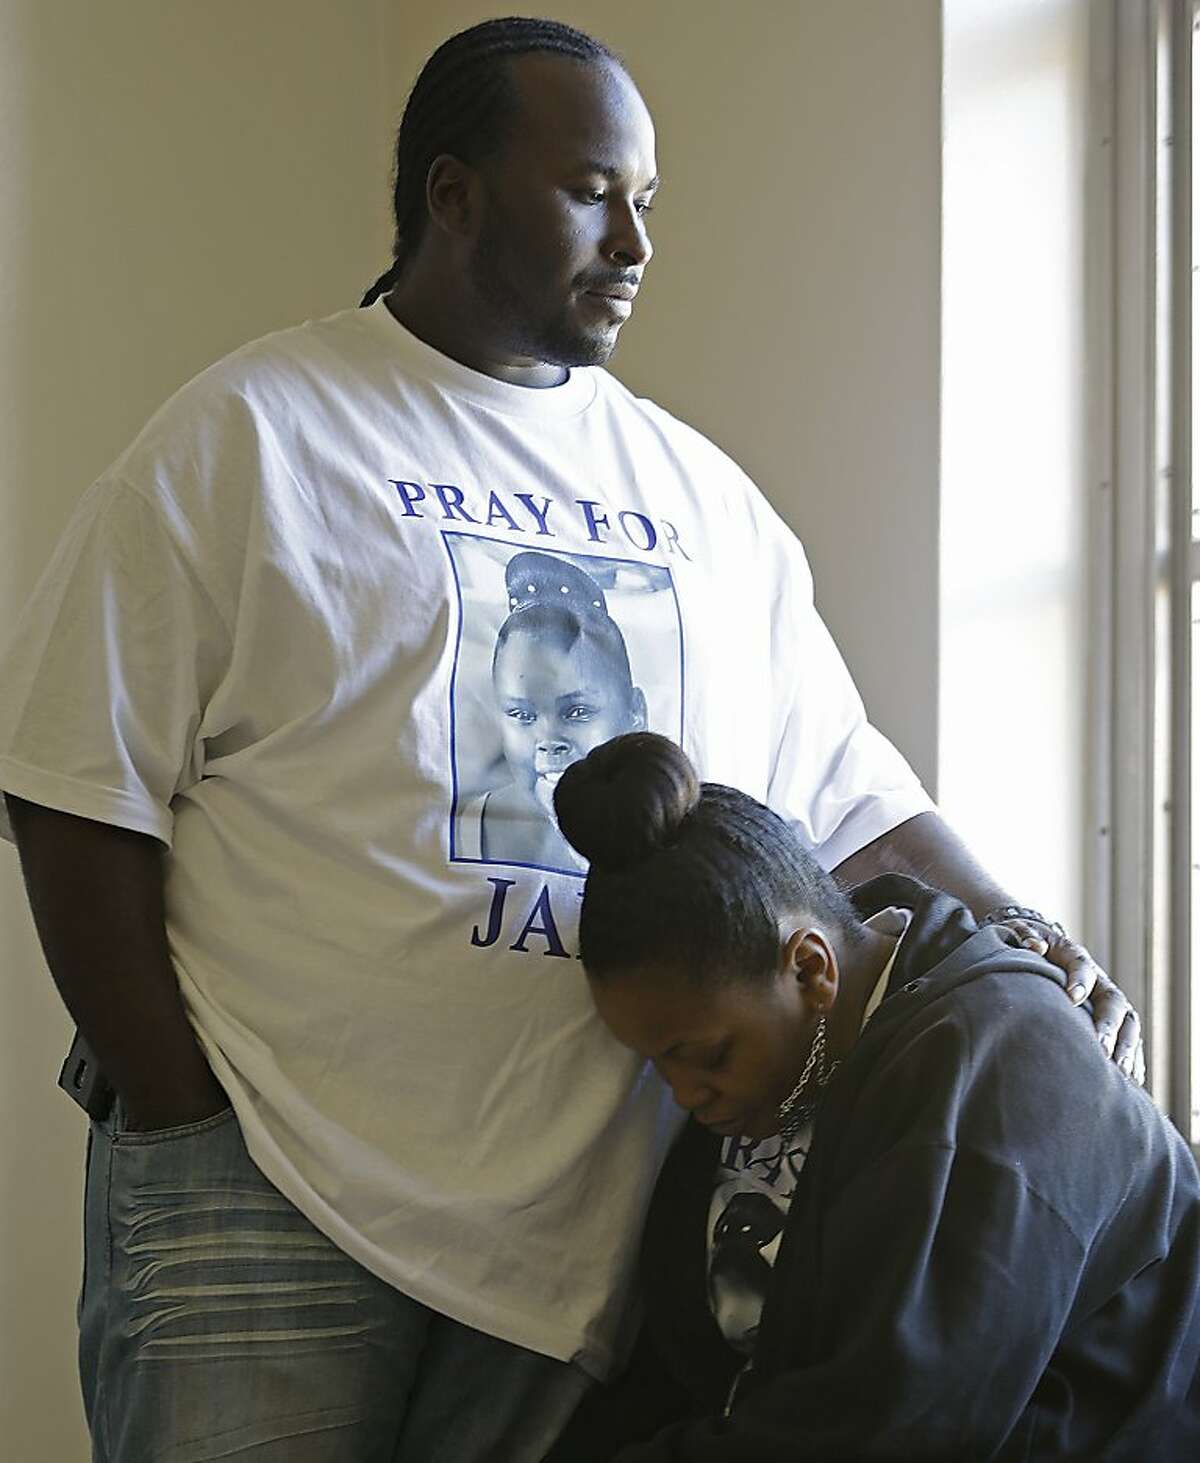 Marvin Winkfield places his arm around his wife Nailah Winkfield, mother of 13-year-old Jahi McMath, as they wait outside a courtroom Friday, Jan. 3, 2014, in Oakland, Calif. A federal magistrate was expected to meet Friday with lawyers to try to resolve a dispute over the care ofJahi McMath, who was declared brain dead after tonsil surgery. (AP Photo/Ben Margot)